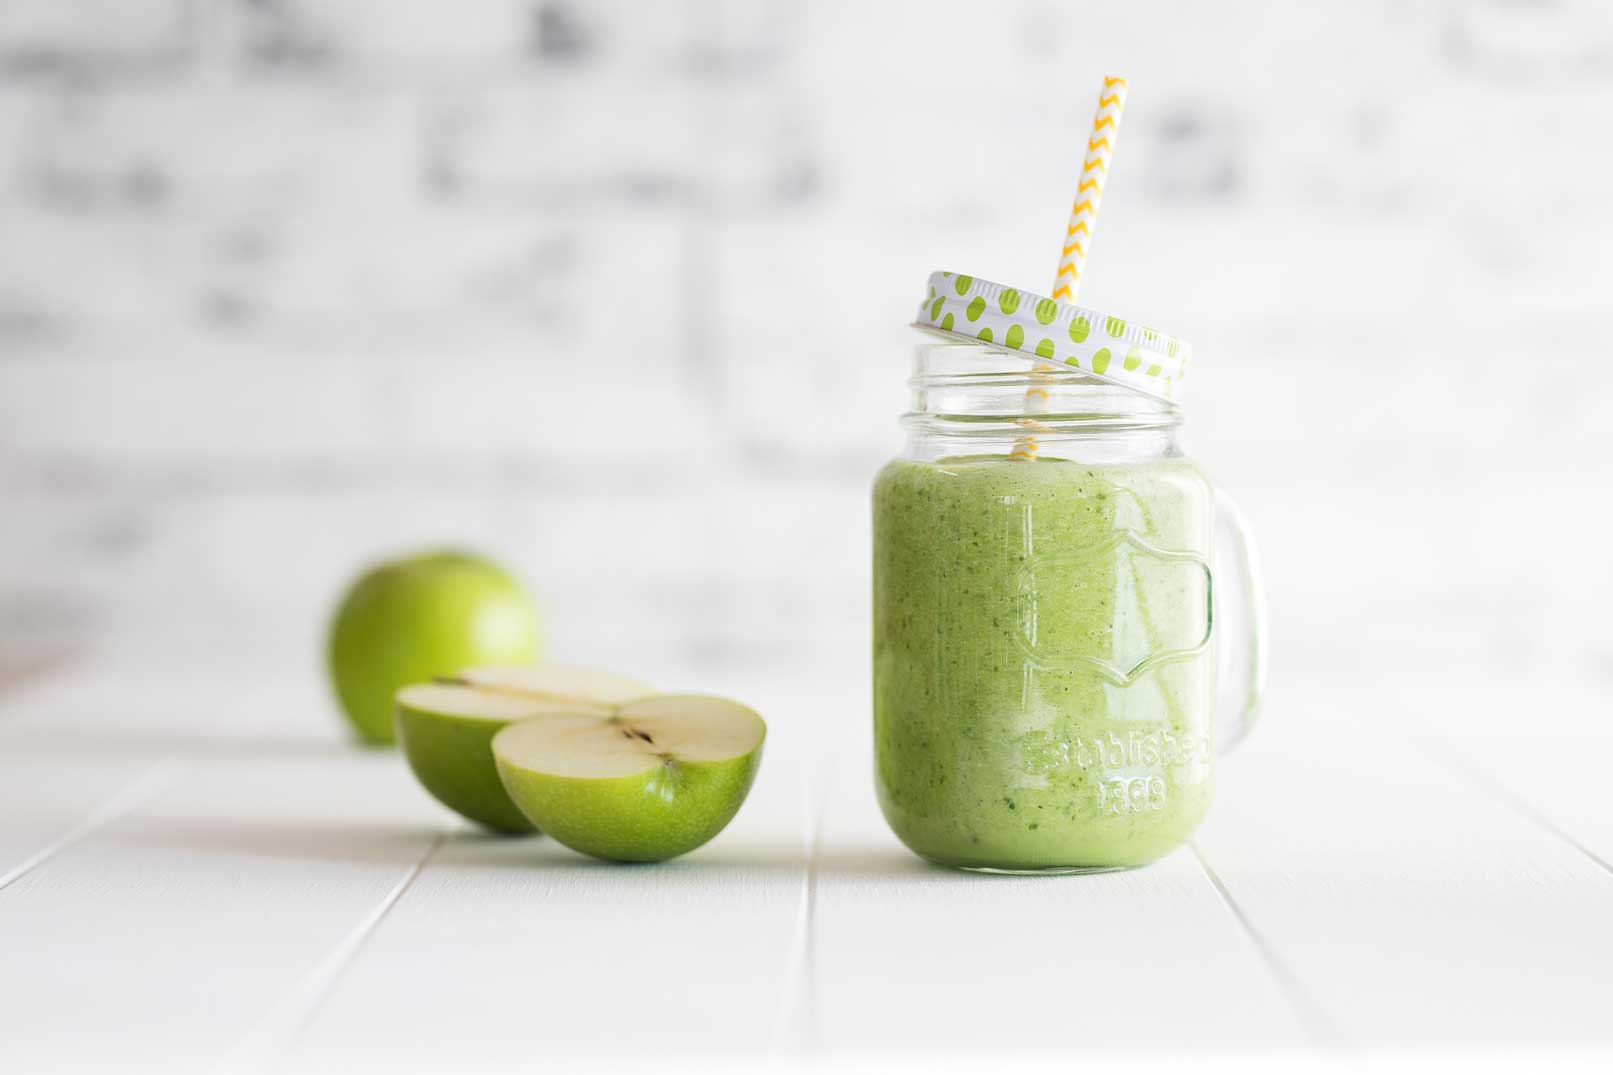 Green smoothie in a glass jug with a lid and straw and a halved green apple on the side